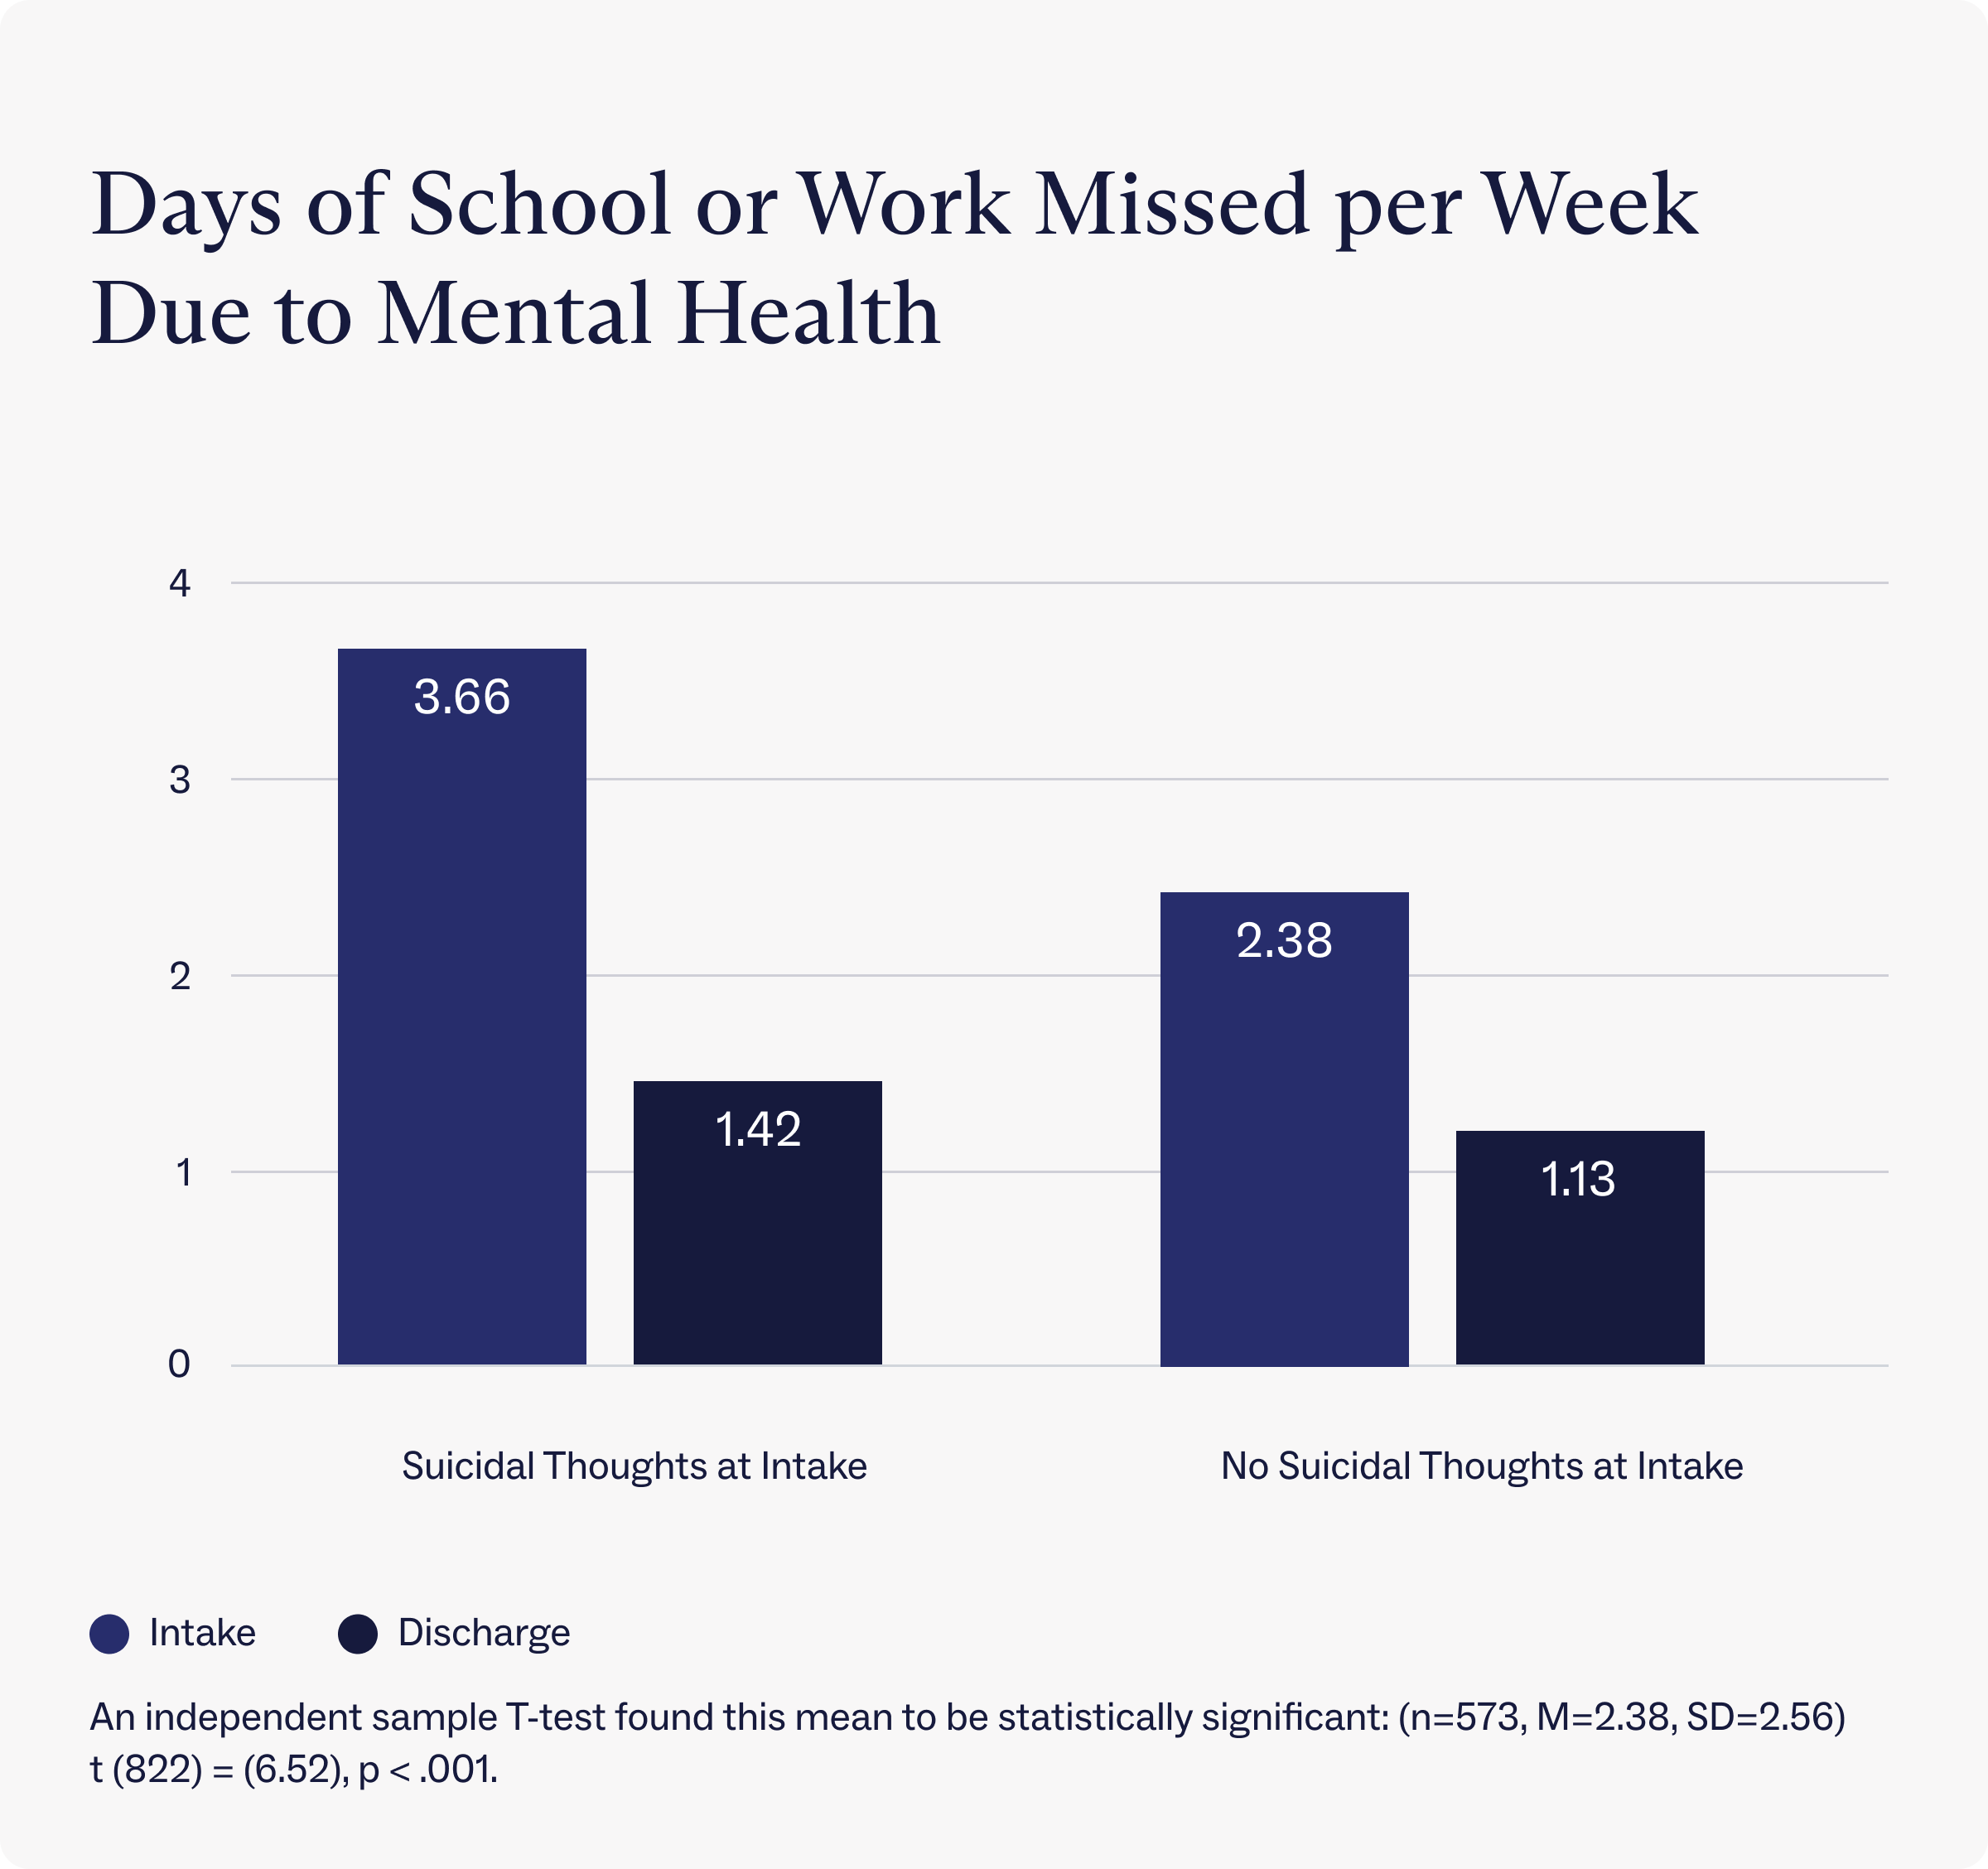 Days of school or work missed per week due to mental health at intake and discharge for Charlie Health clients